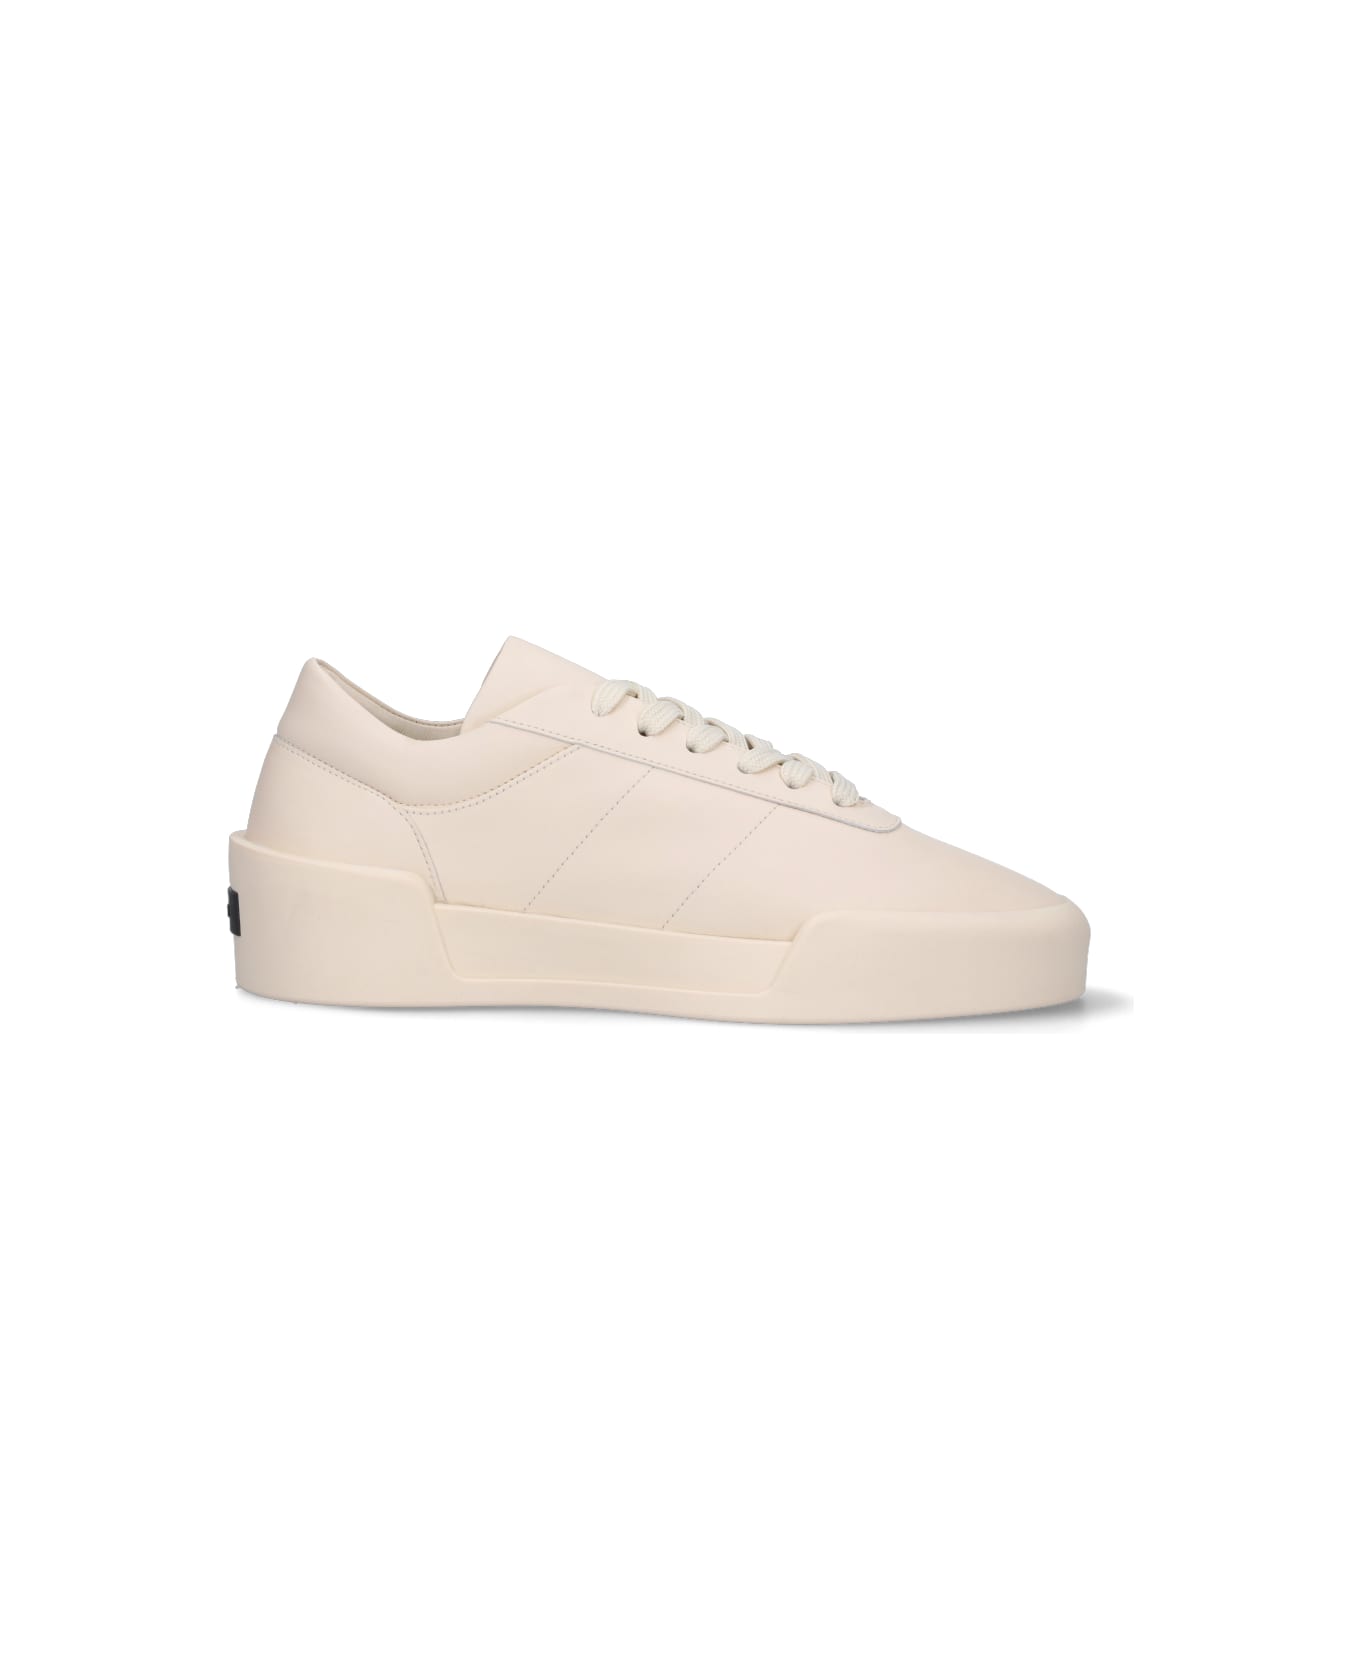 Fear of God 'aerobic Low' Sneakers - Crema スニーカー